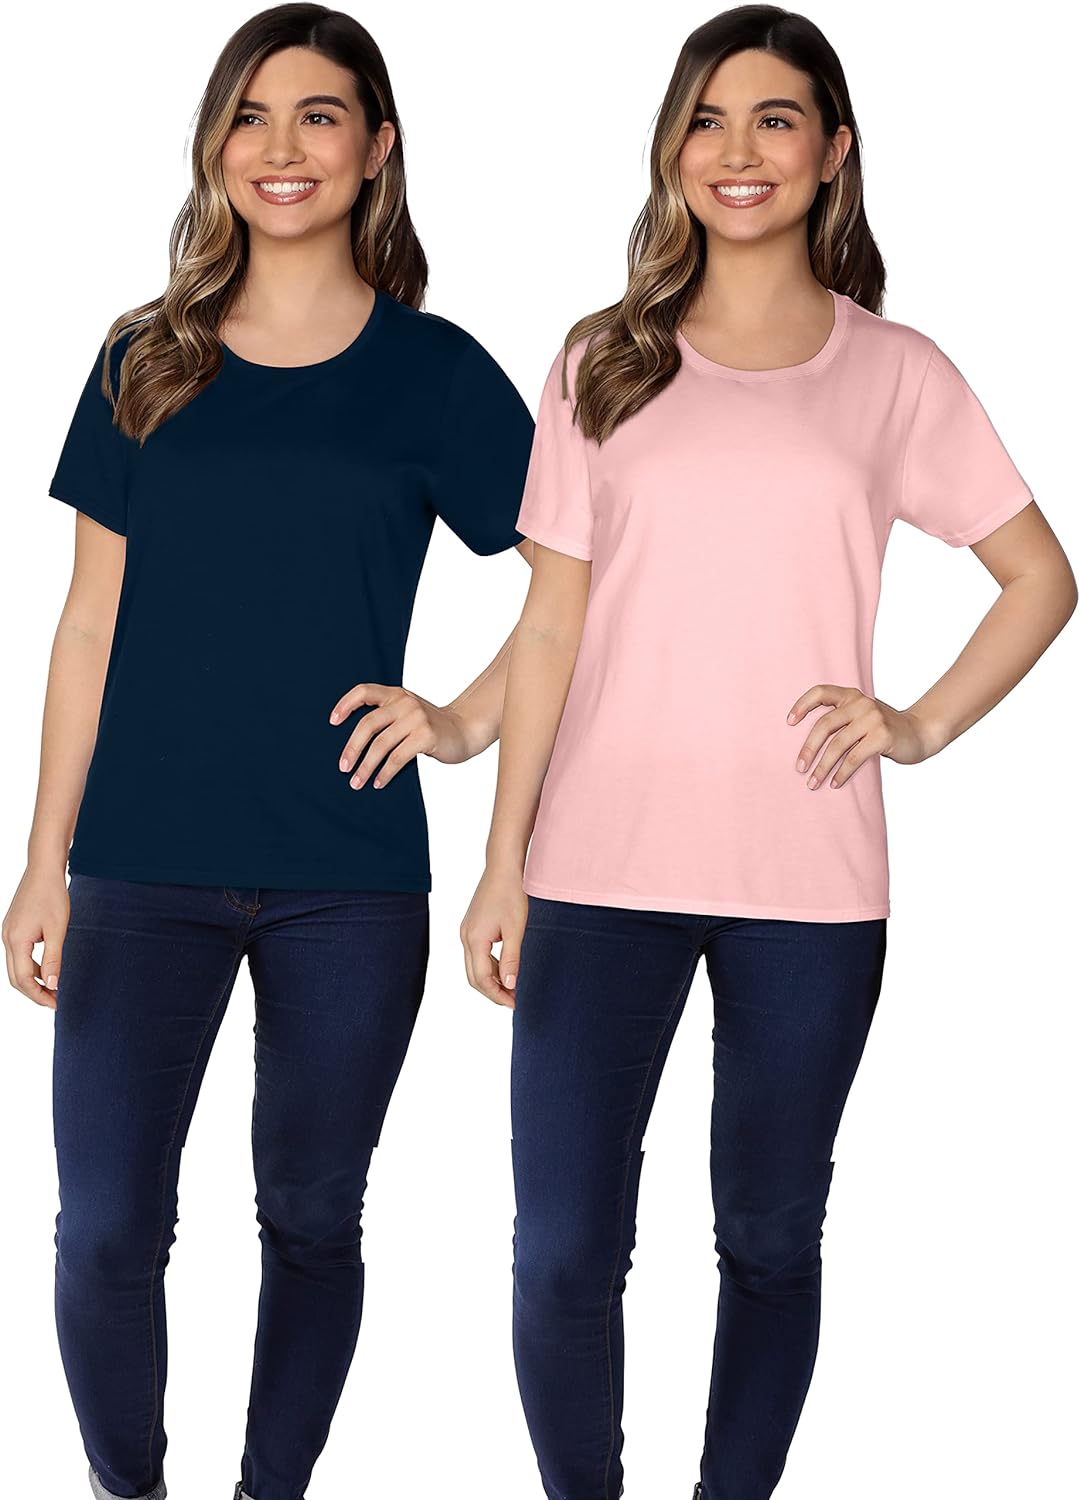 Fruit of the Loom Womens Crafted Comfort Pima Cotton Short Sleeve T-shirts